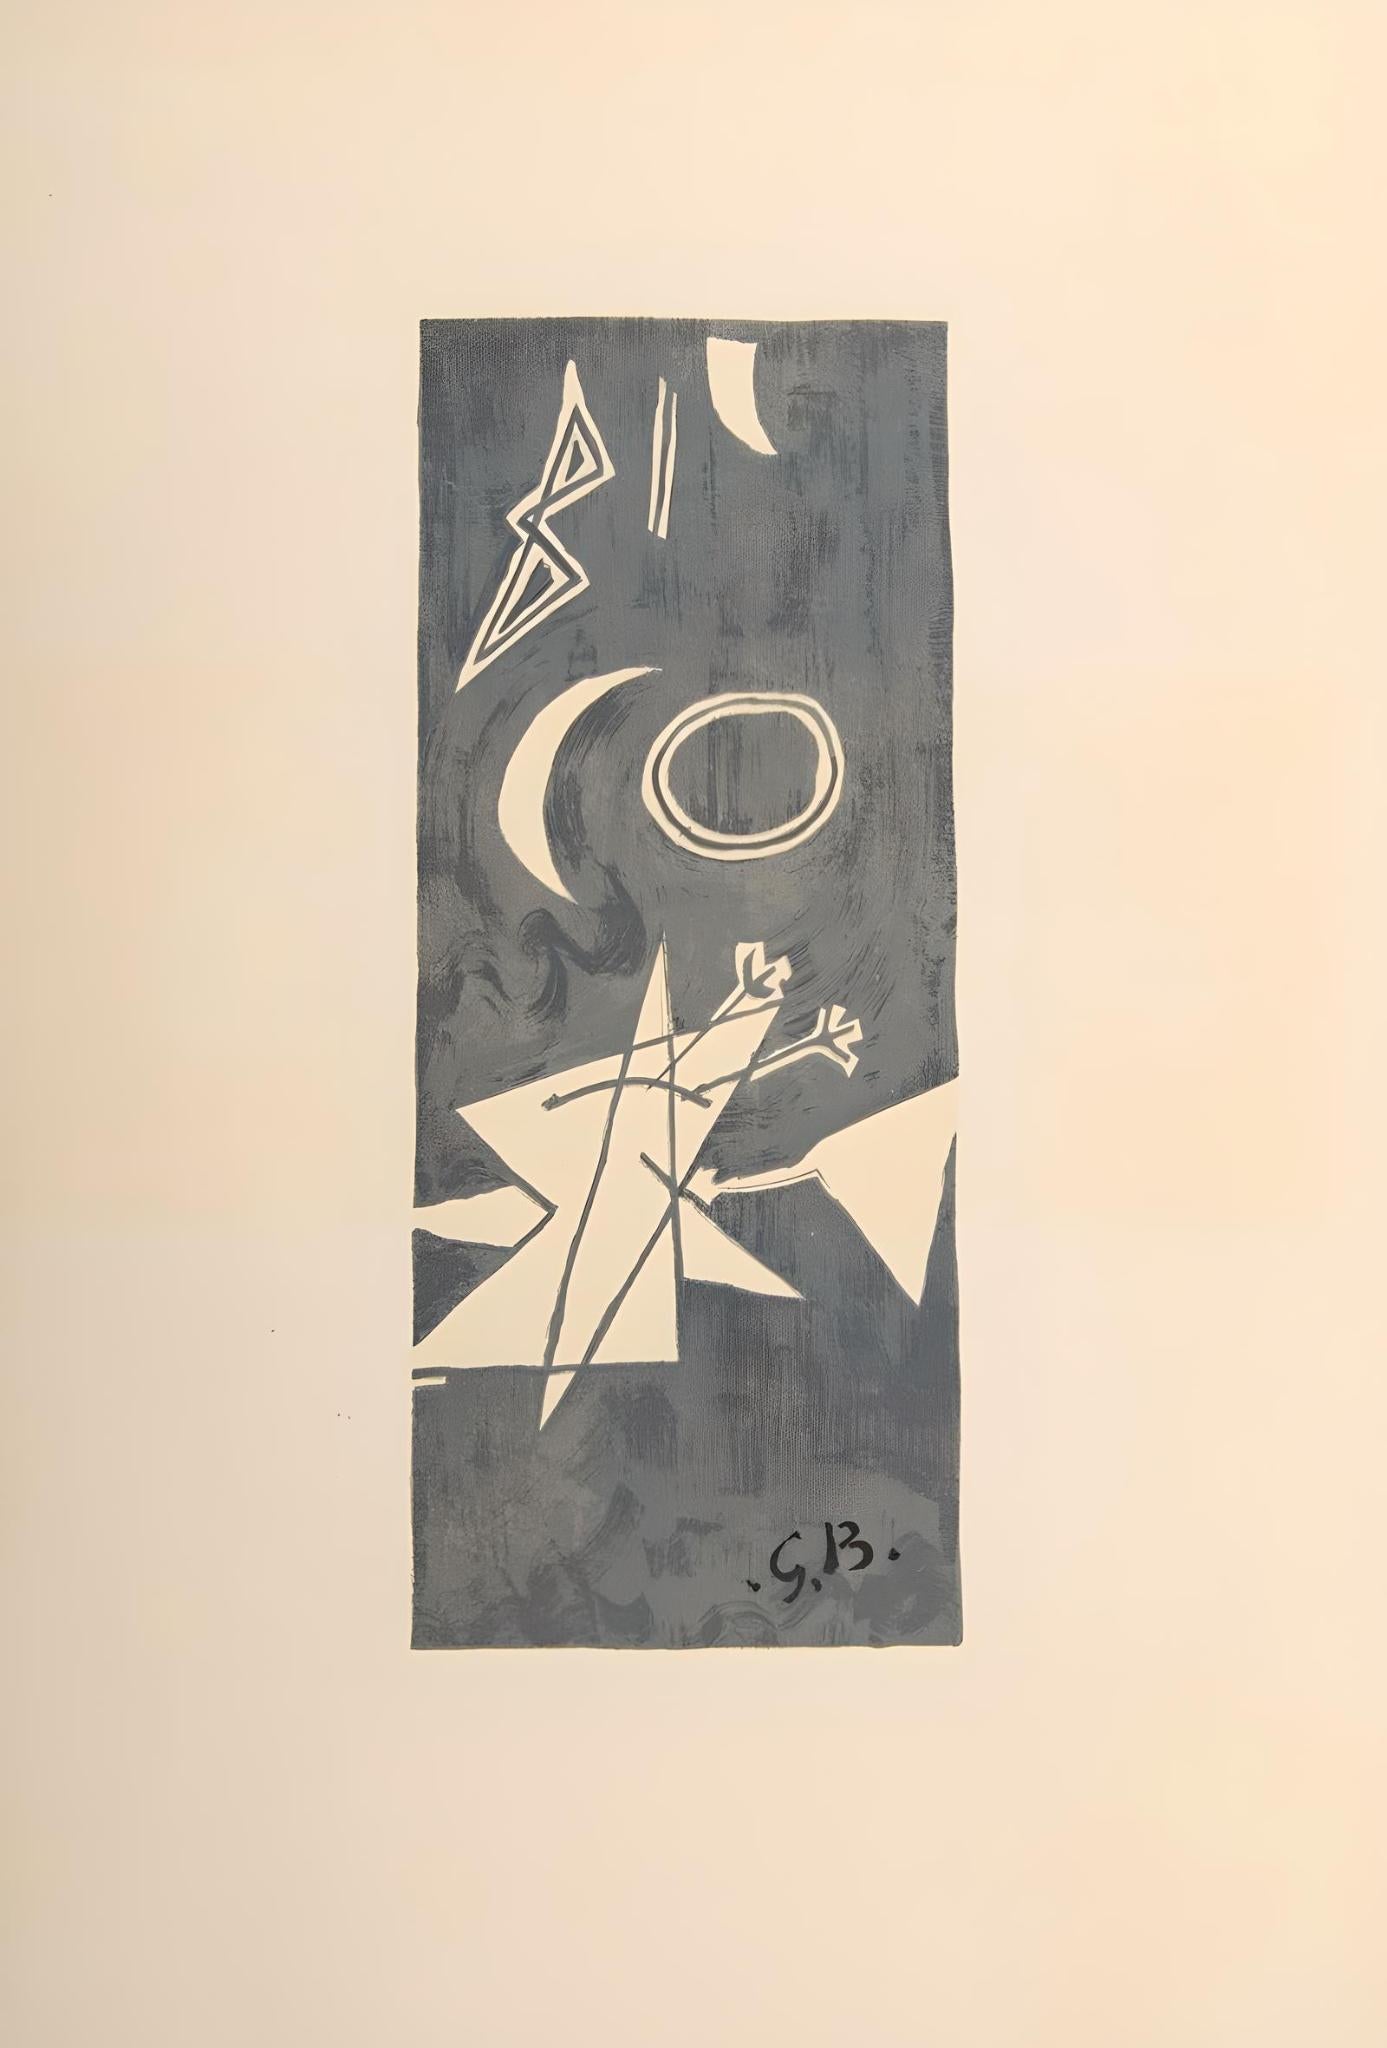 Lithograph on wove paper. Inscription: Signed in the plate and unnumbered; text on verso, as issued. Good Condition. Notes: From Derrière le miroir, N° 115, published by Derrière le miroir, Paris; printed by Galerie Maeght, Paris, 1959. Excerpted